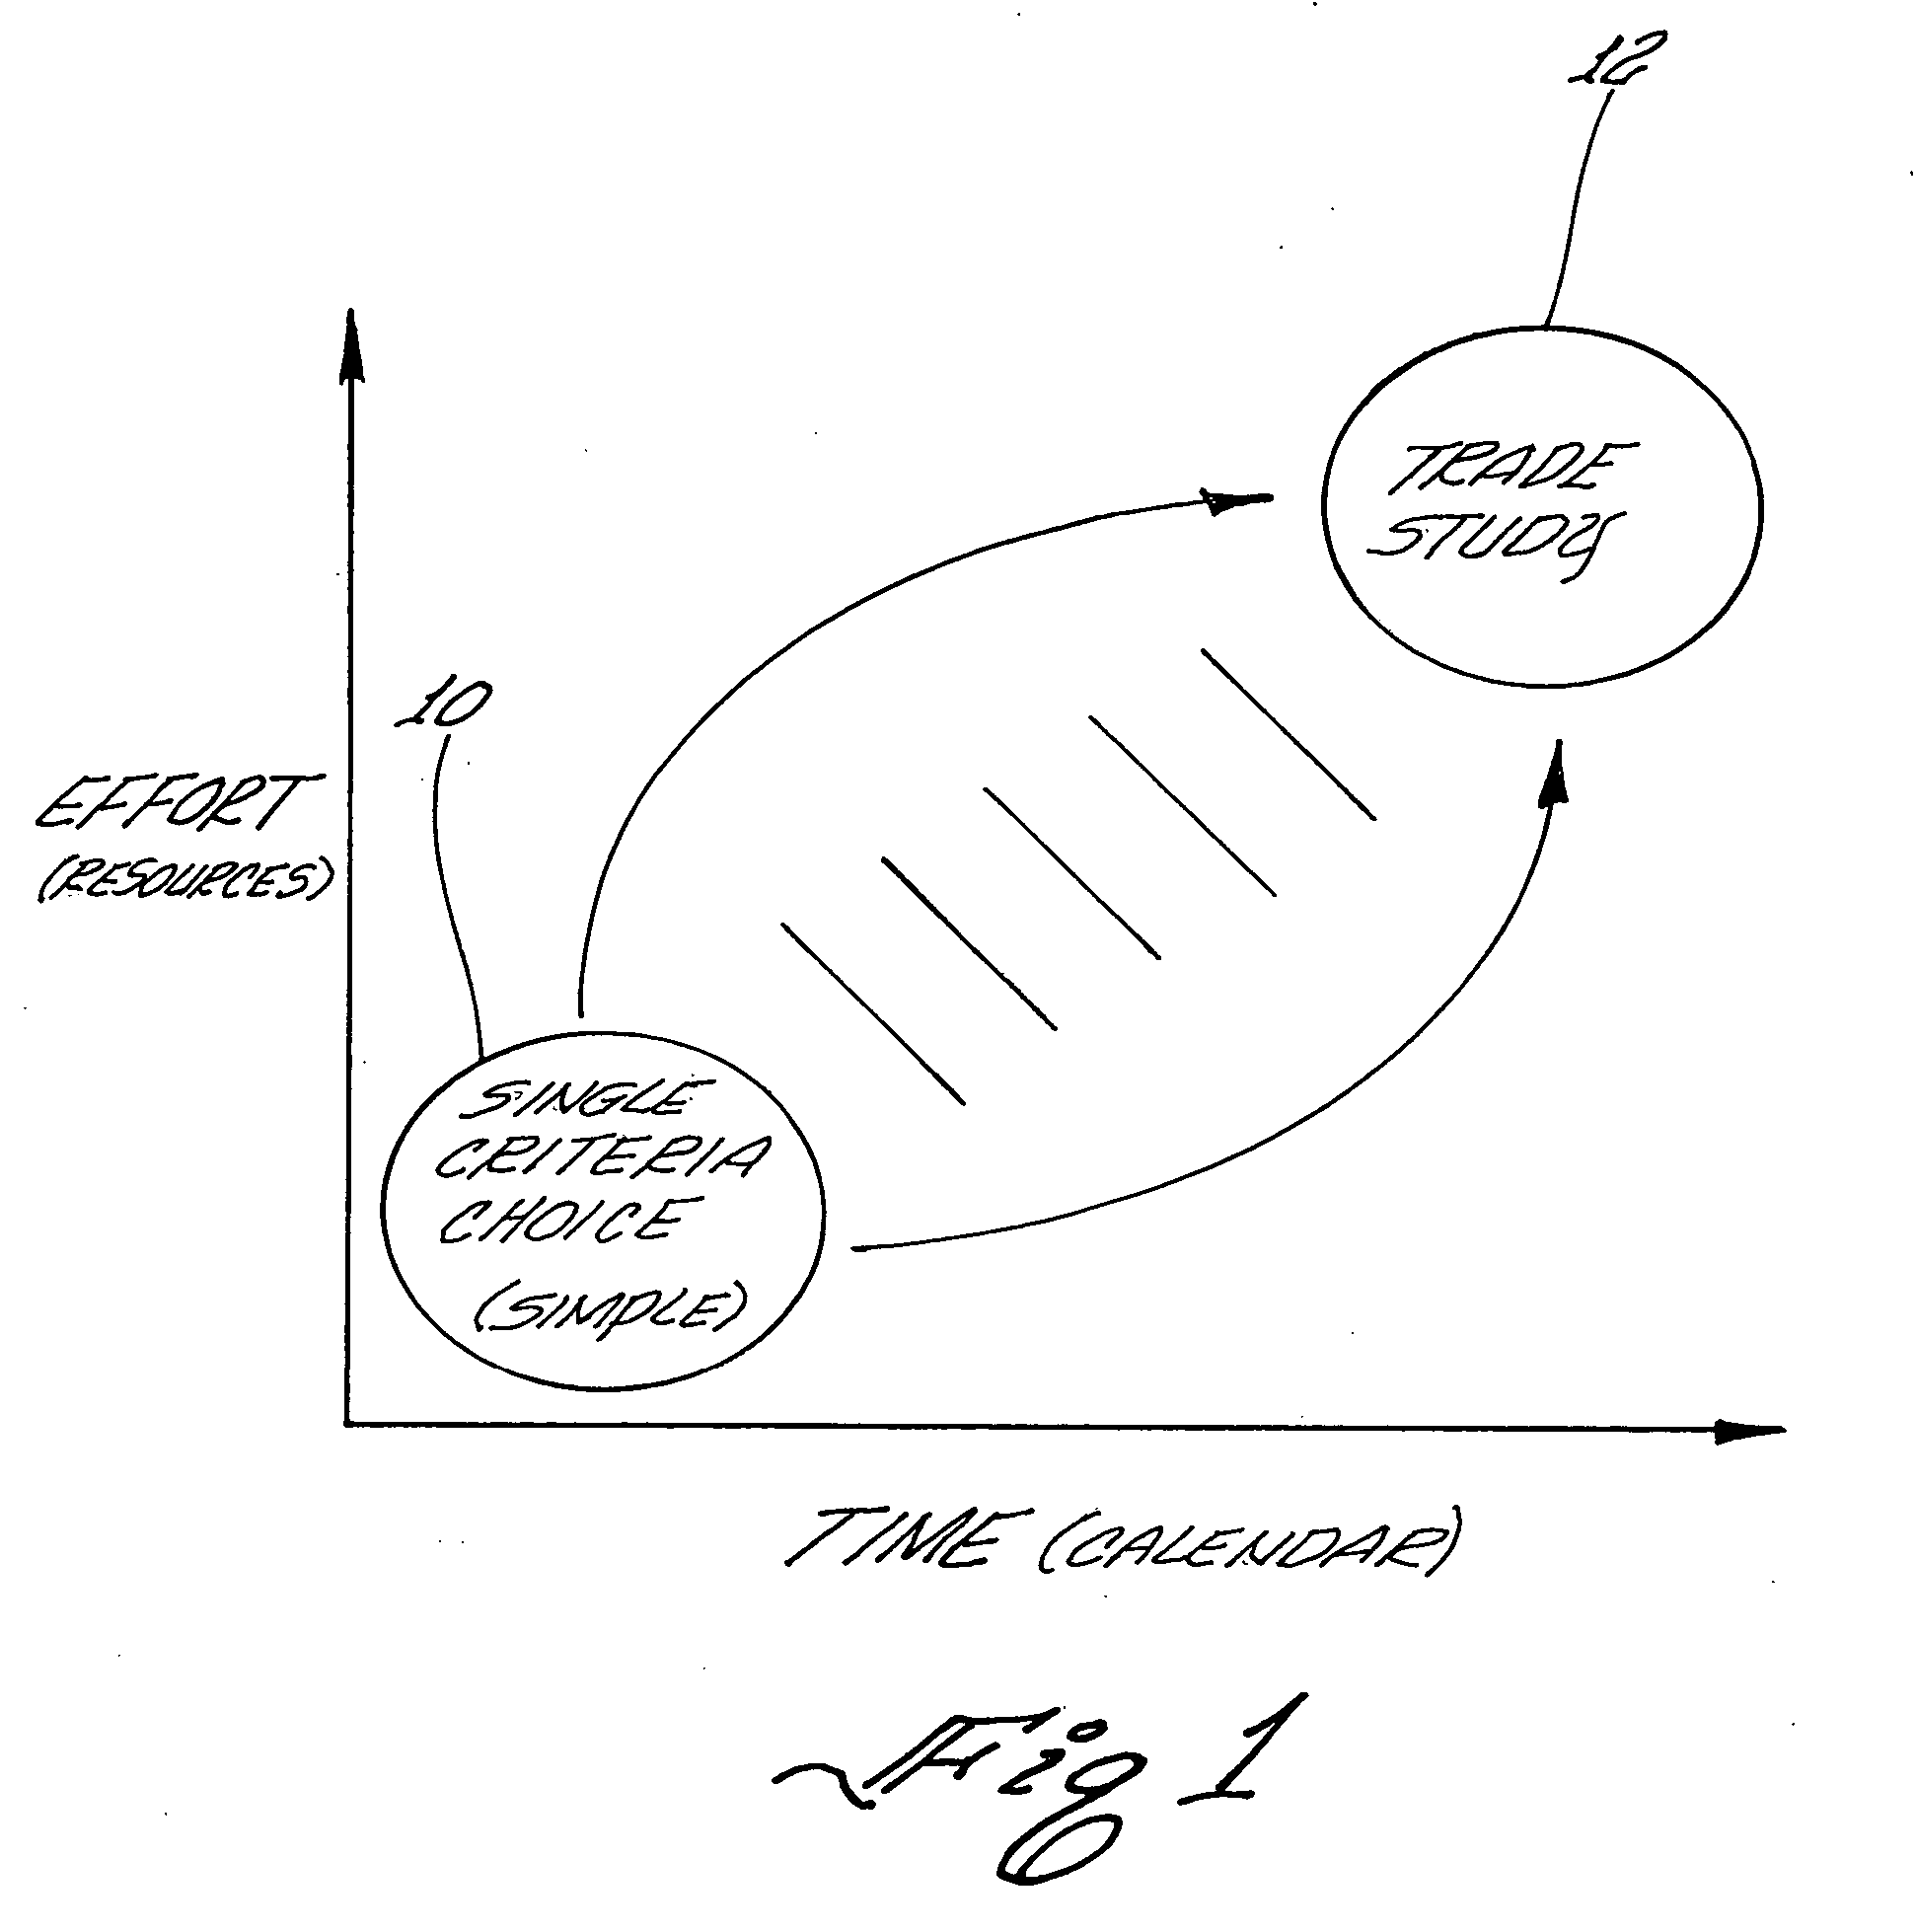 Method for transforming subjective data to quantitative information for use in a decision making process